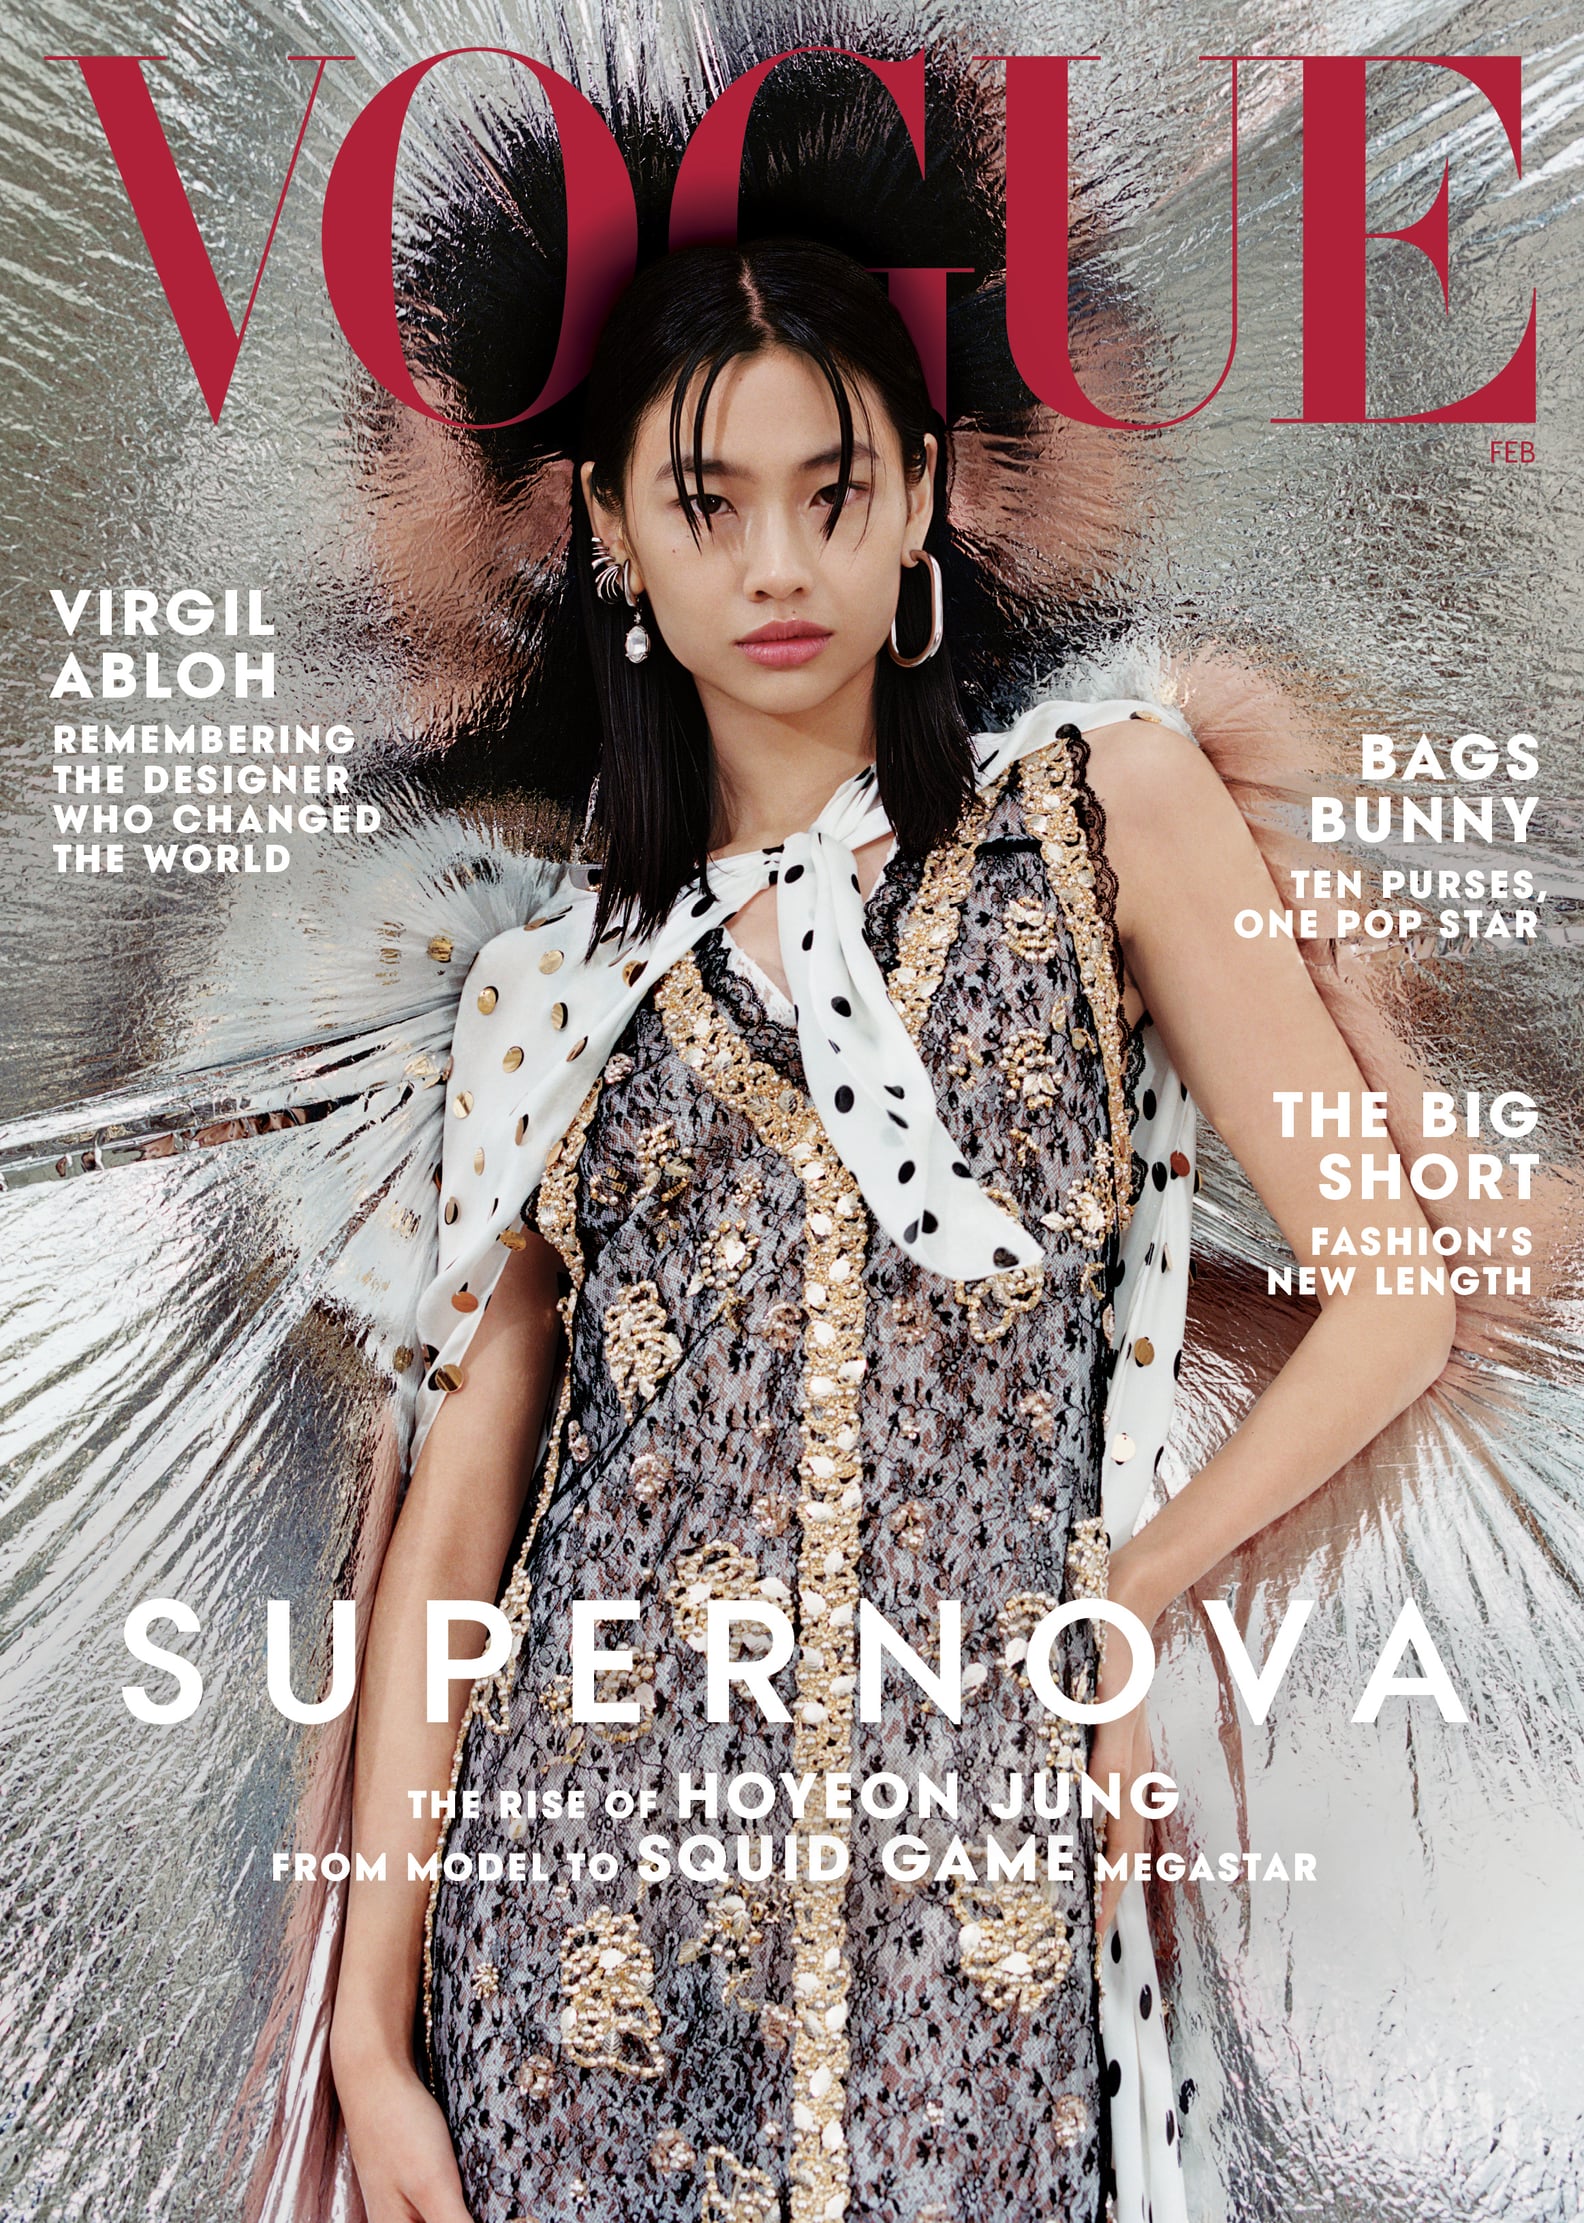 See Hoyeon Jung's Outfits in Vogue February Issue | POPSUGAR Fashion